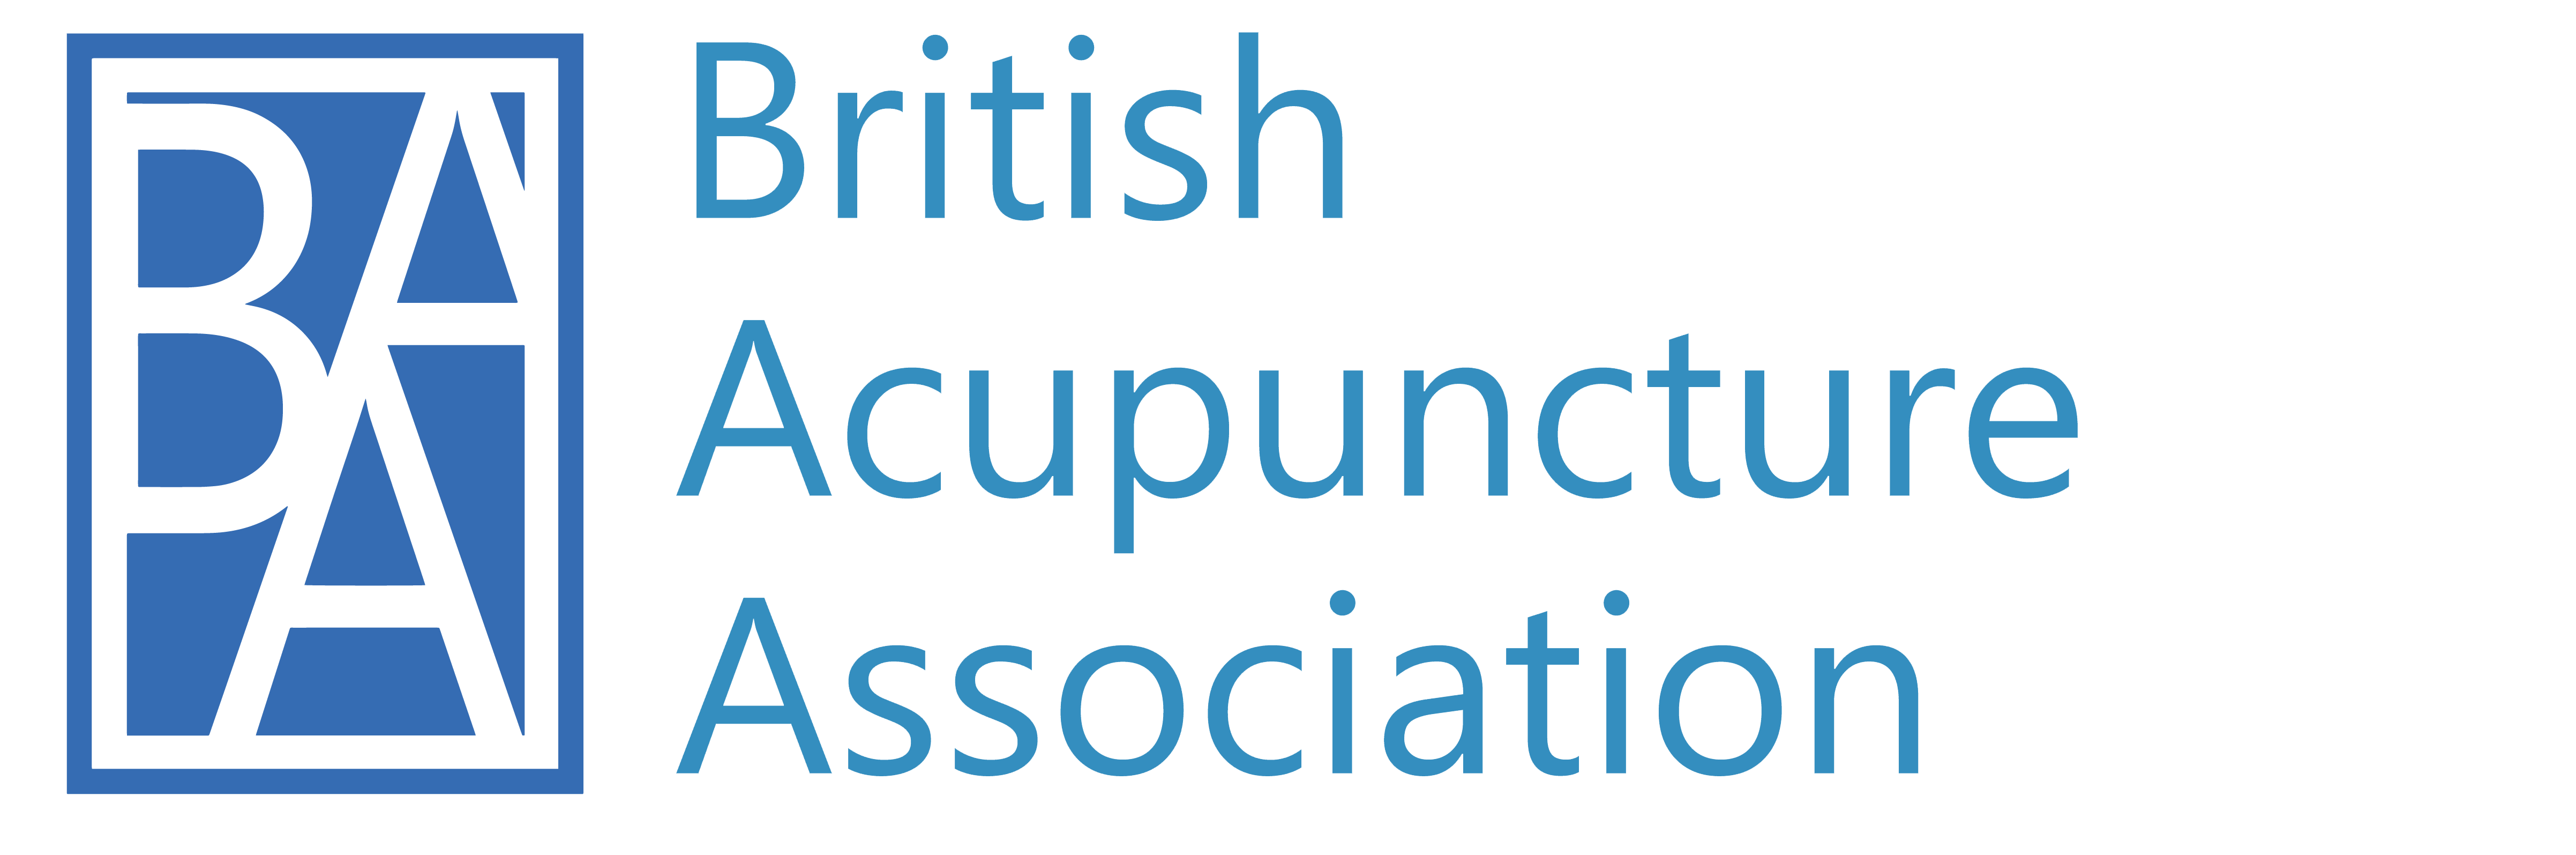 Logo of Acupuncture Watford - Andre Motuz Acupuncture Practitioners In Watford, Hertfordshire